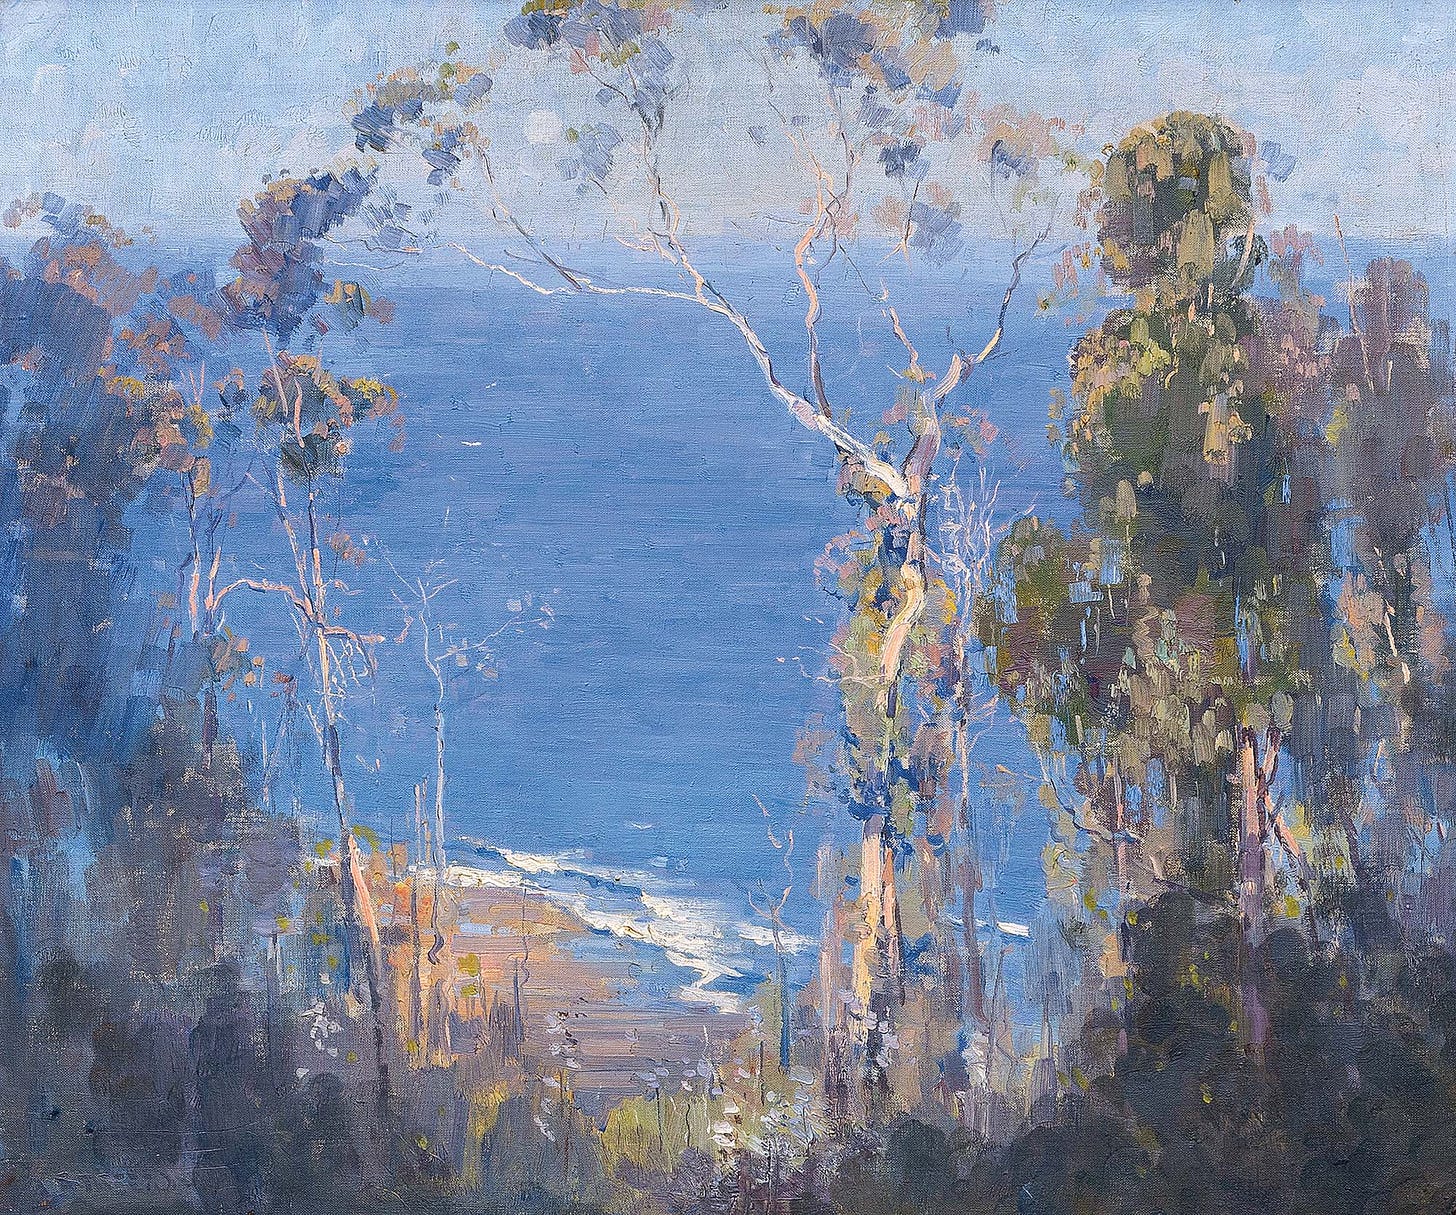 Ocean blue, Lorne, painting by Arthur Streeton - Paintings Porcelain and  Photography - Culture Victoria